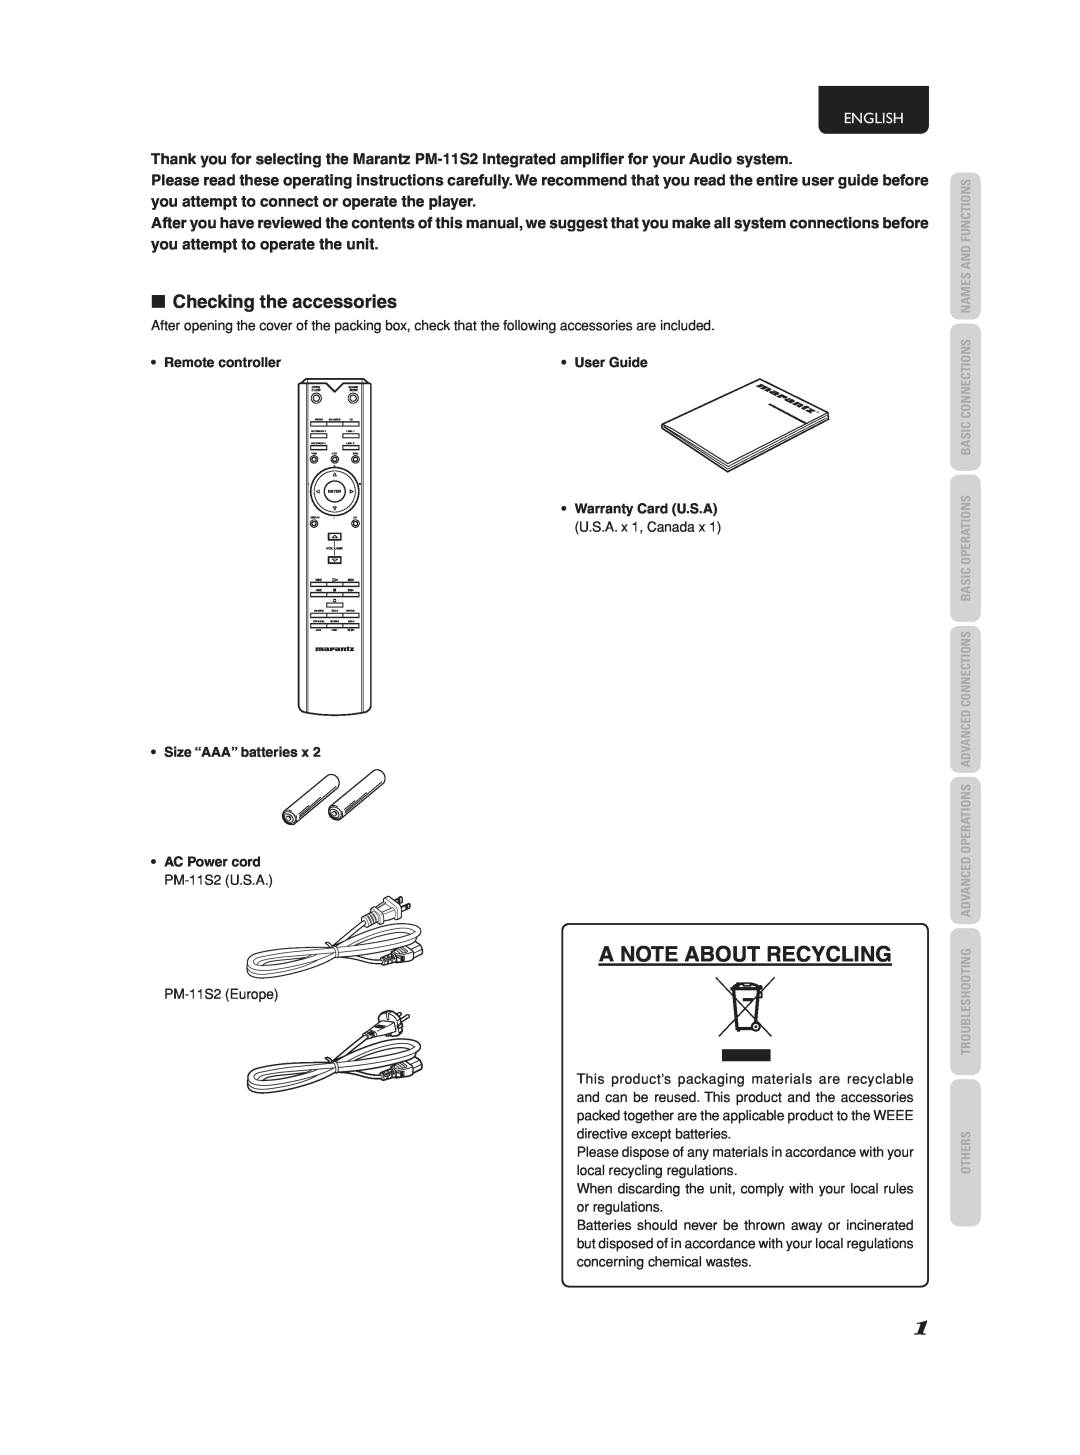 Marantz PM-11S2 manual A Note About Recycling, 7Checking the accessories, English 